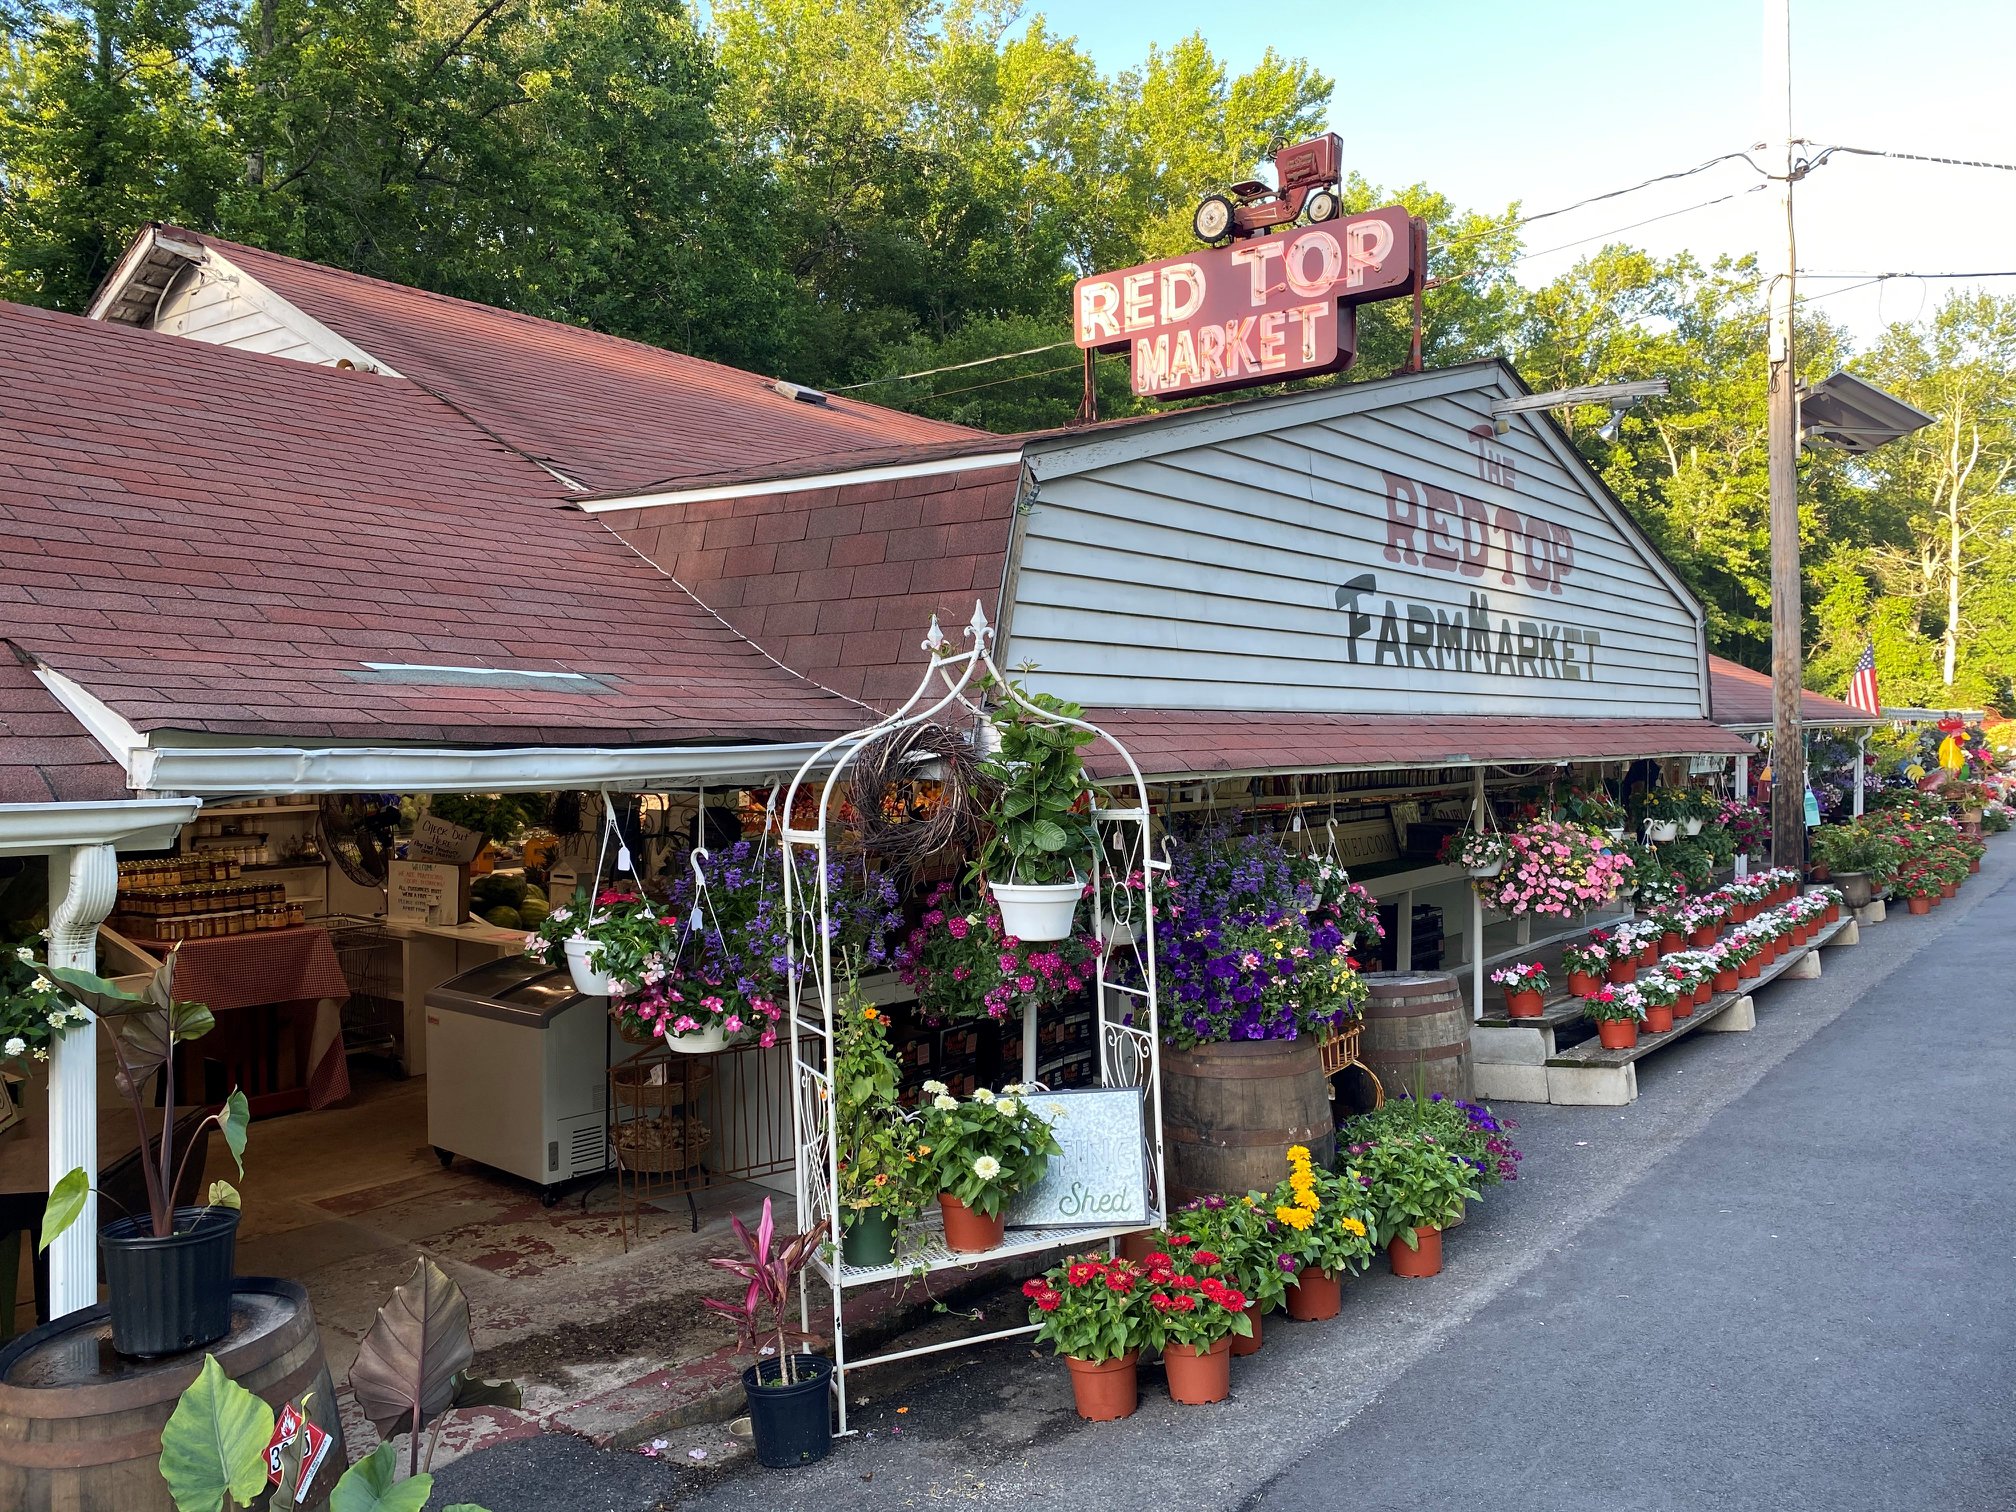 Front view of Red Top Farm Market. A white building with a red roof surrounded by flowers and plants for sale.